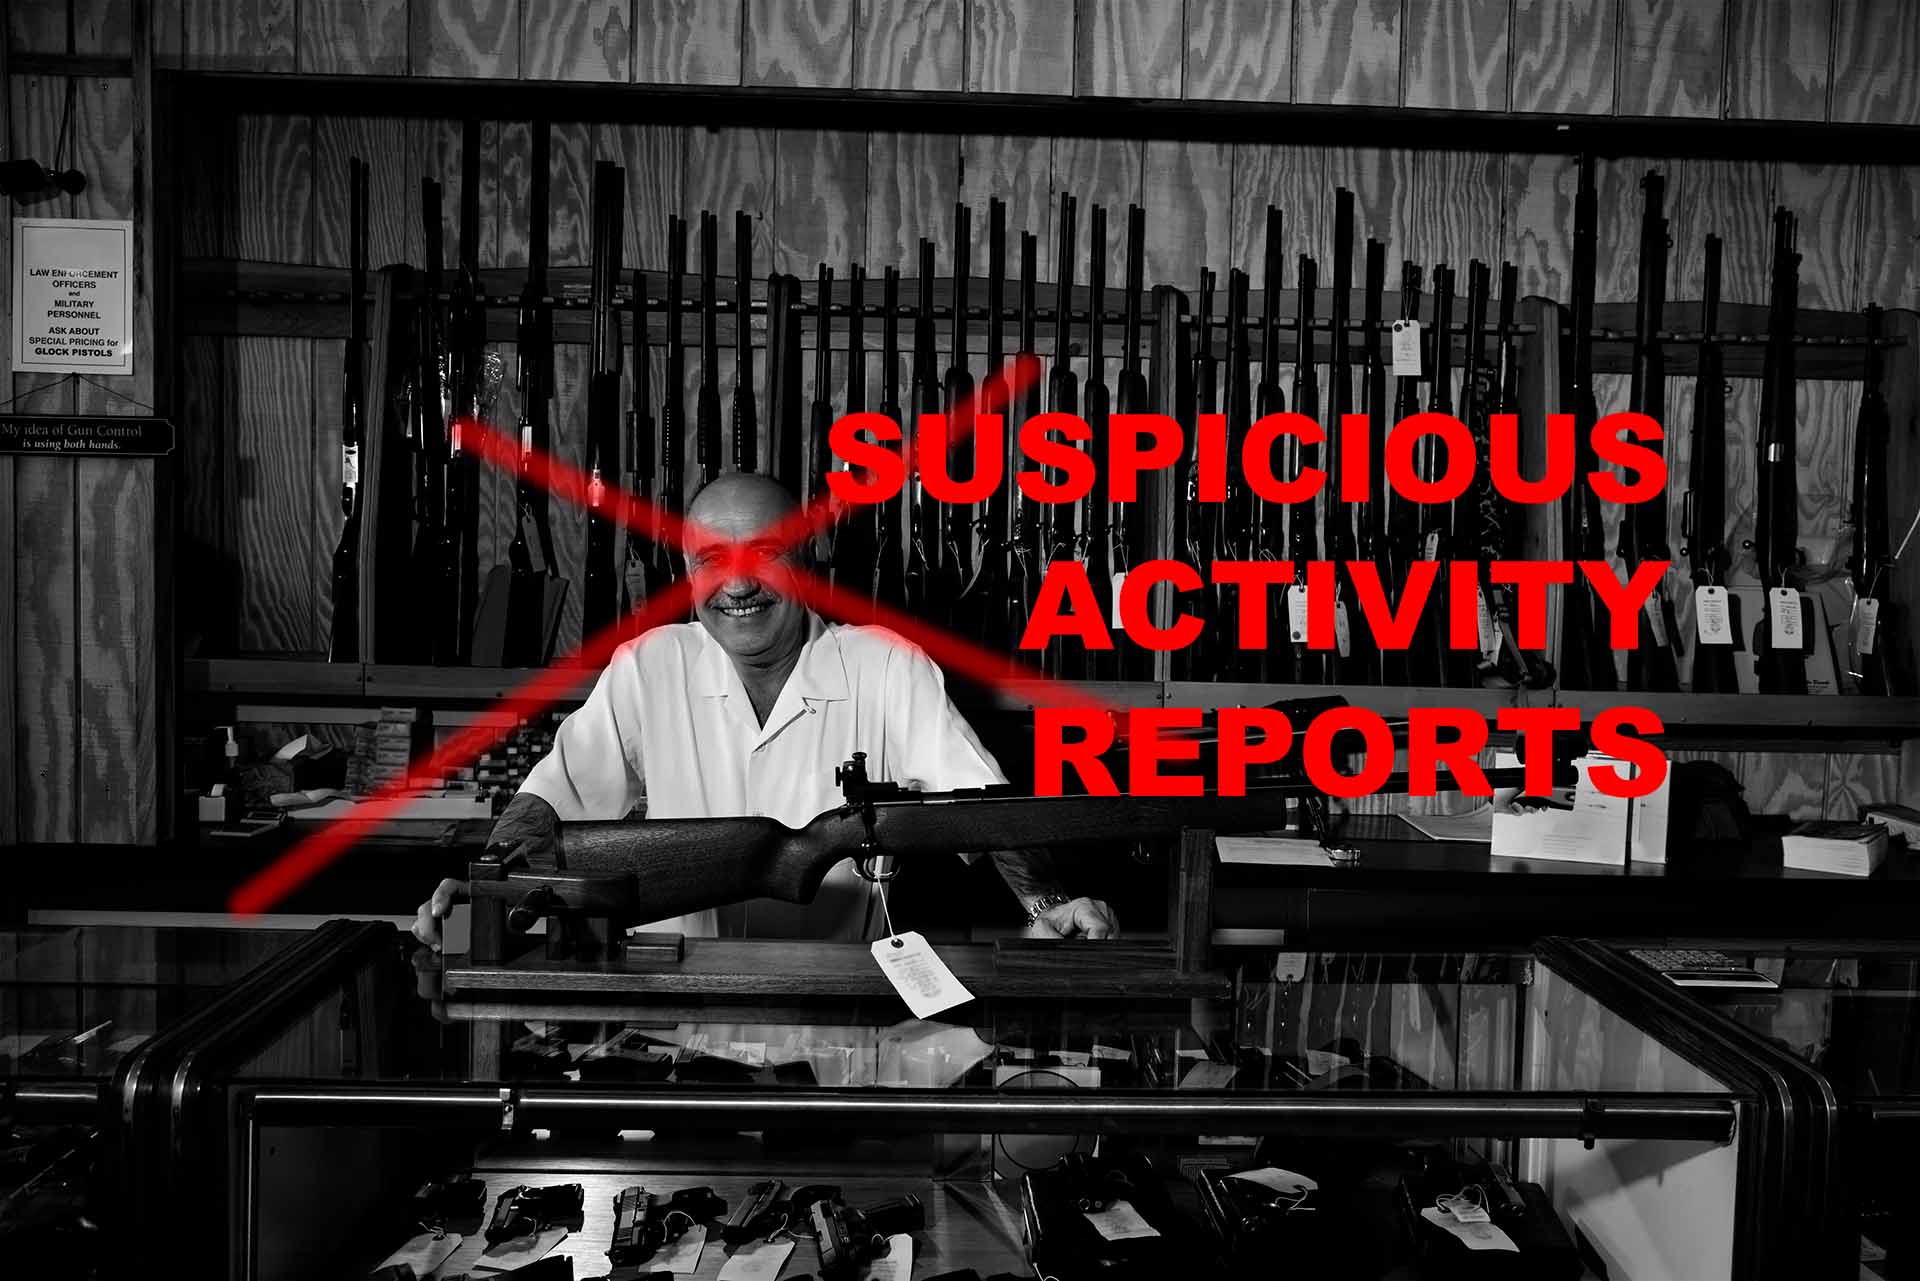 New "gun store" code is for Suspicious Activity Reports